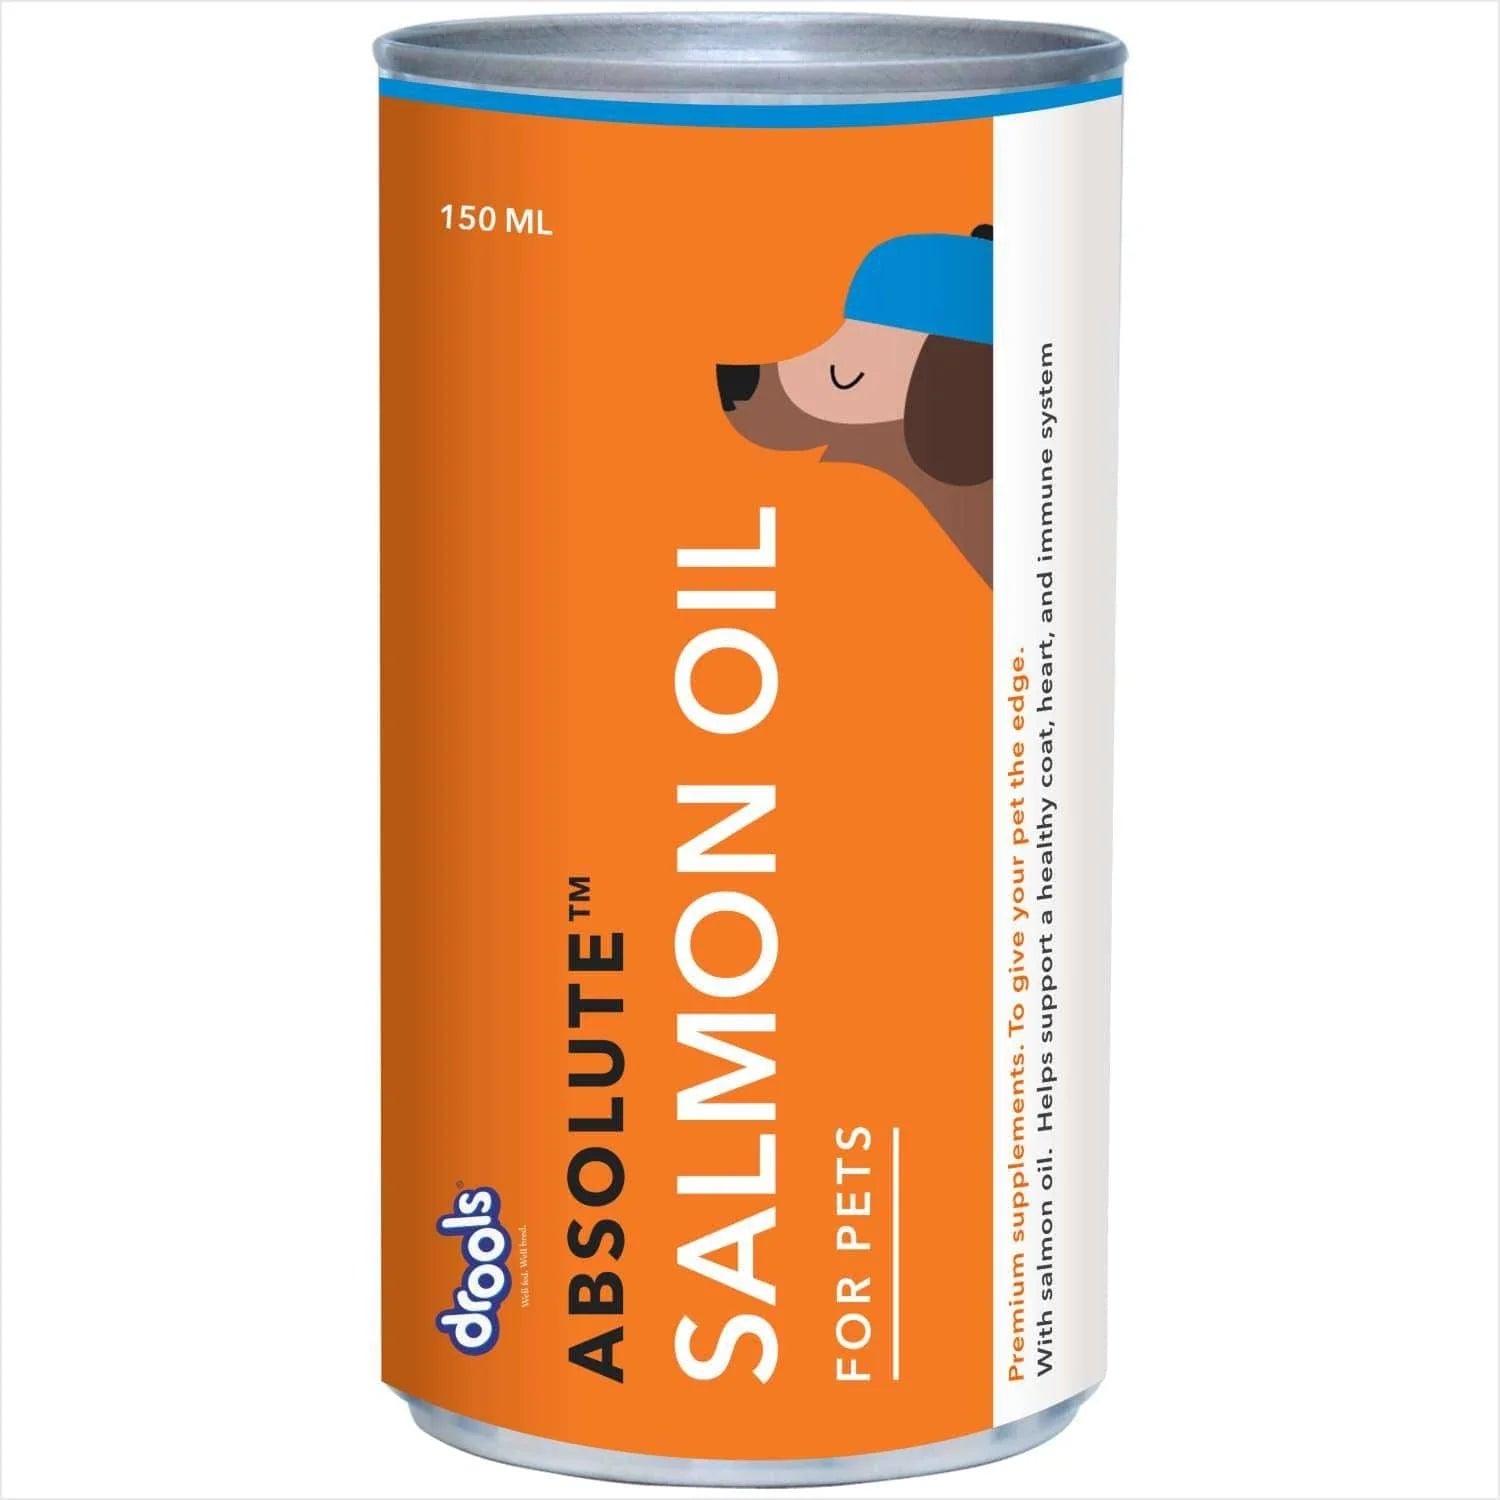 Drools Absolute Salmon Oil Syrup Supplement for Dogs